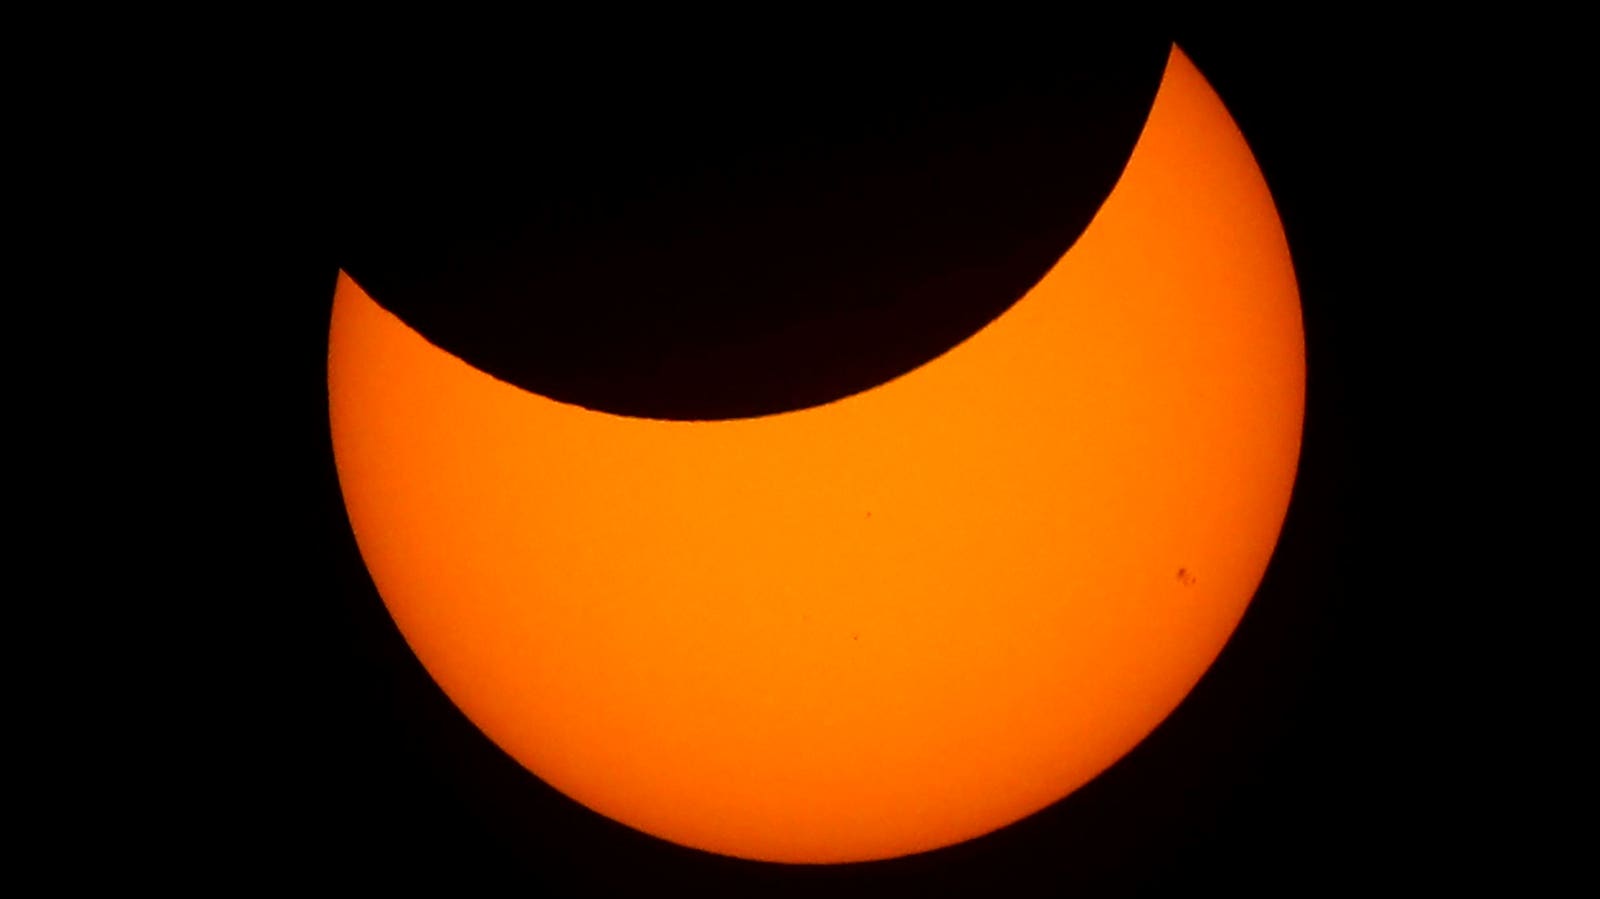 26 Locations To See Monday’s Partial Photo voltaic Eclipse Across The U.S.